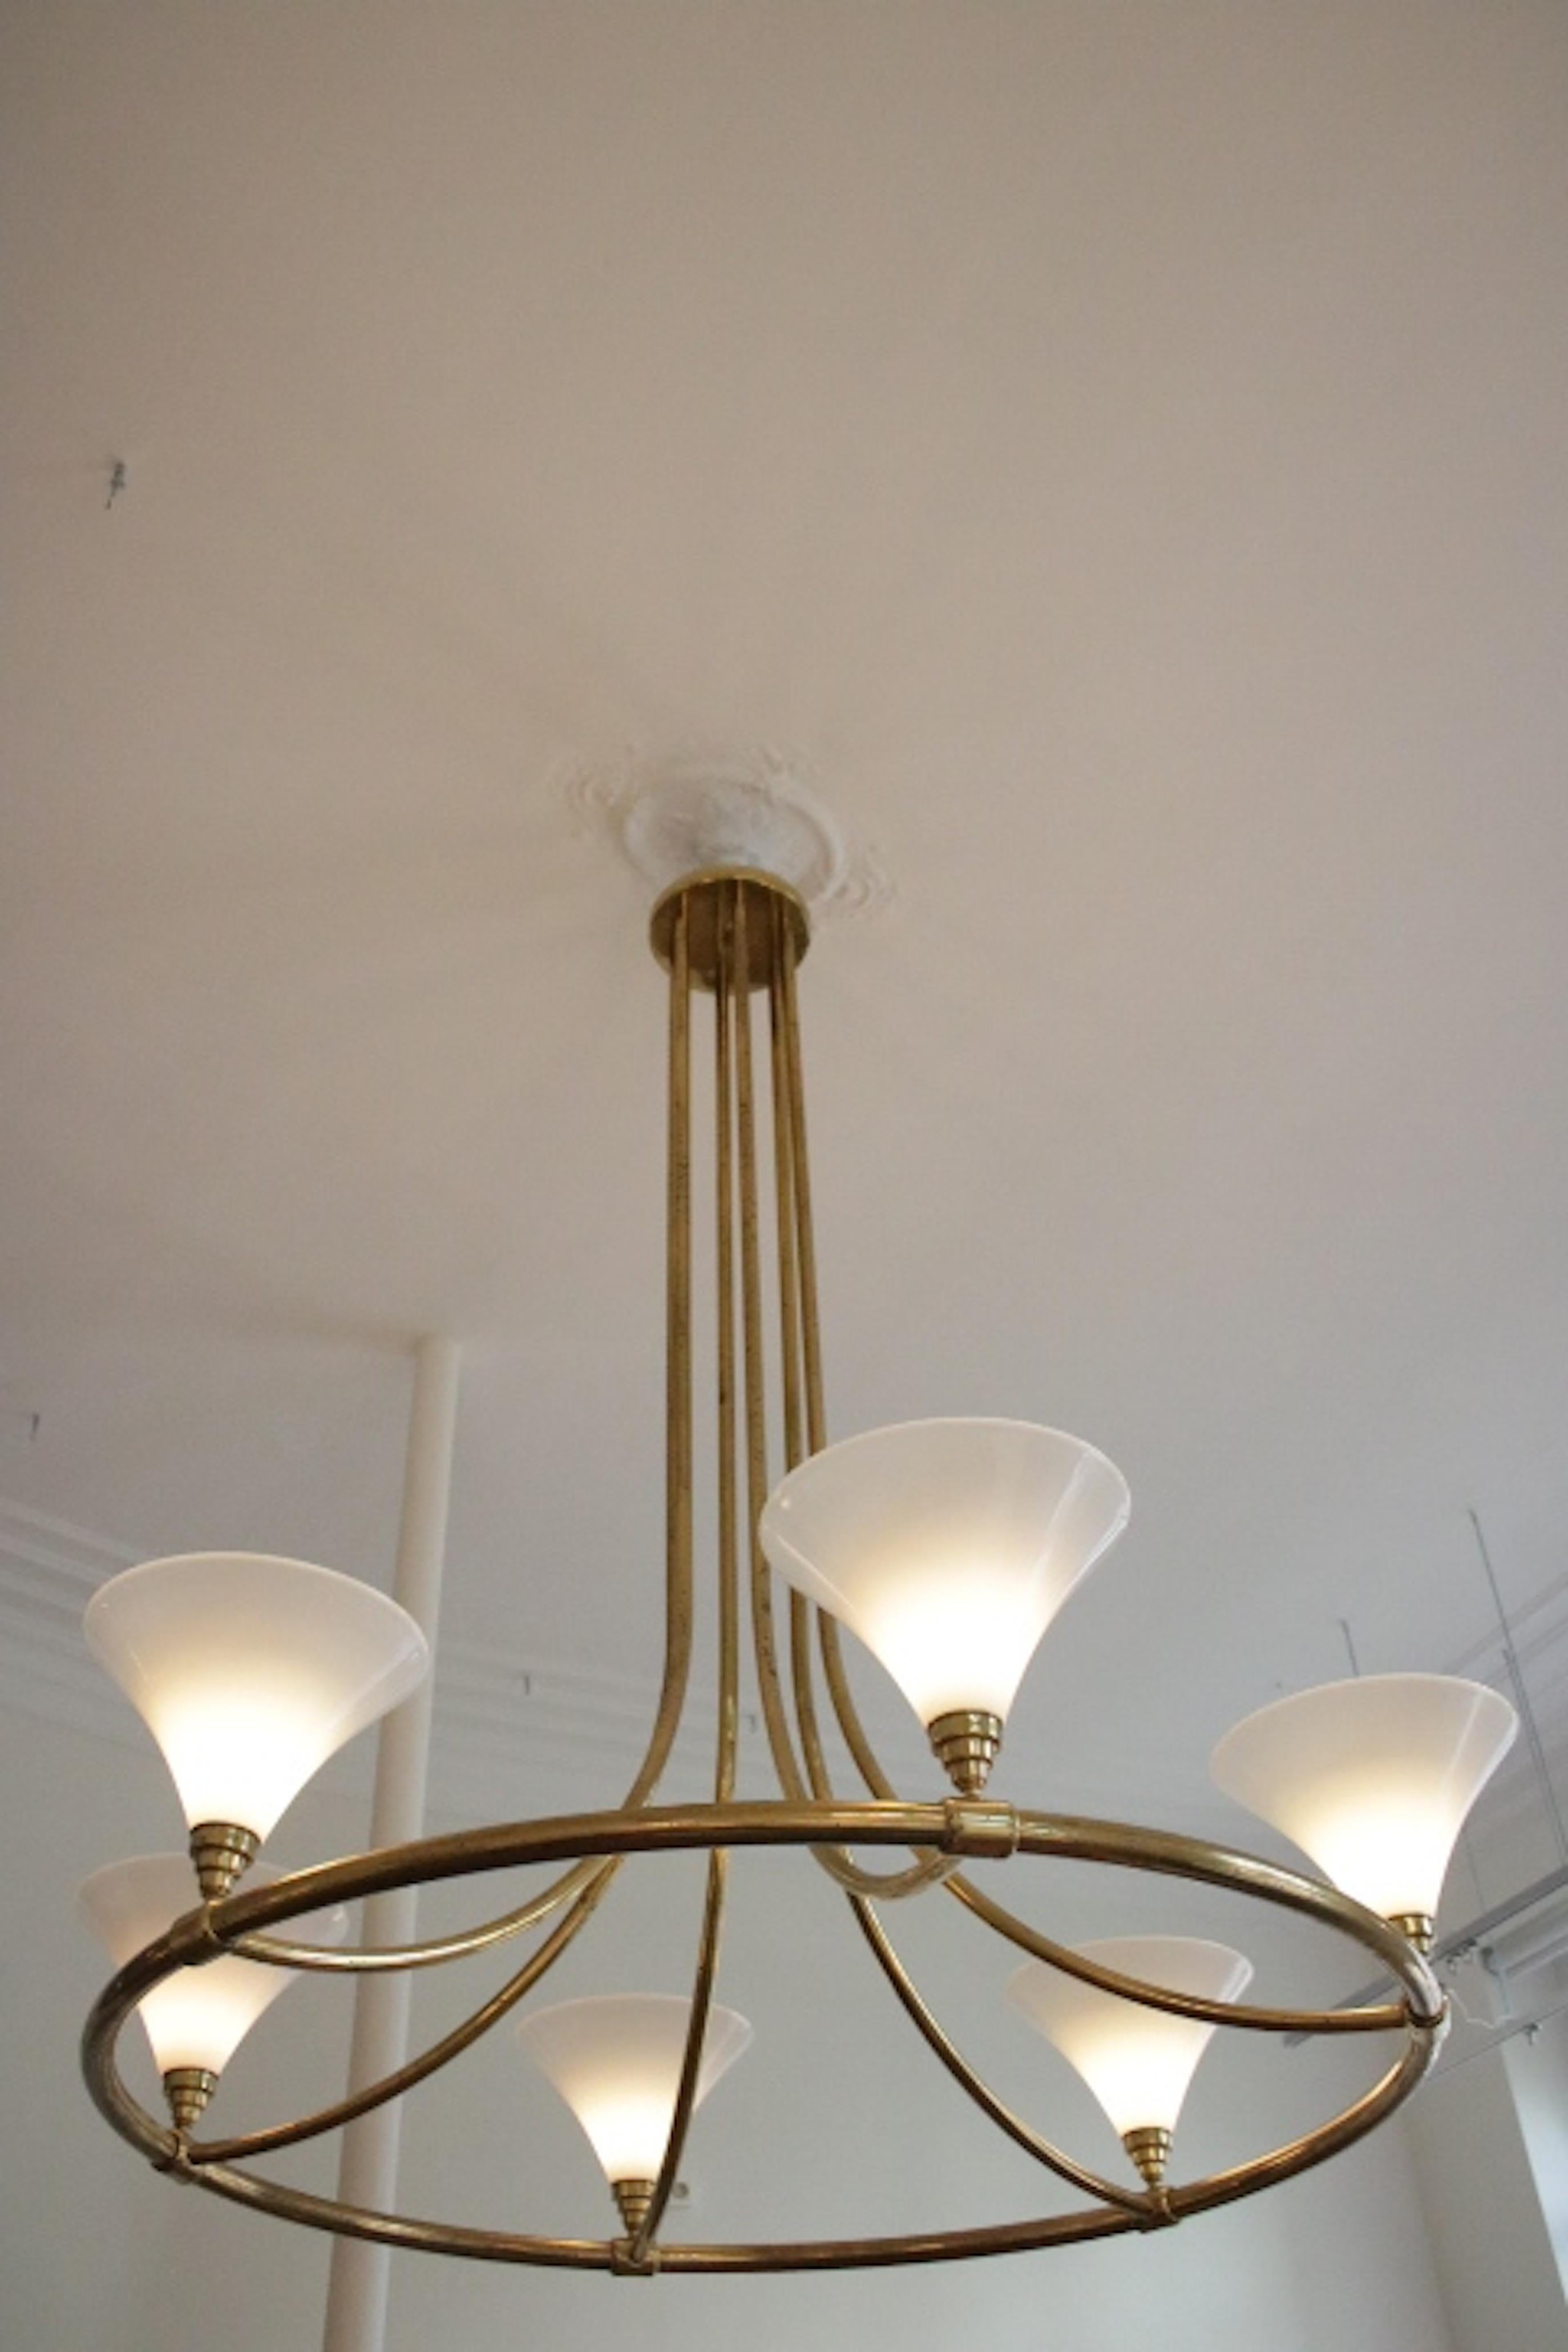 An extra large large ( two meters high), rare and very impressive Mid-Century Chandelier, probably from a luxurious hotel in Viena. Brass frame and six opaline shades.Very good condition.The frame shows wear consistent with time and use ,but